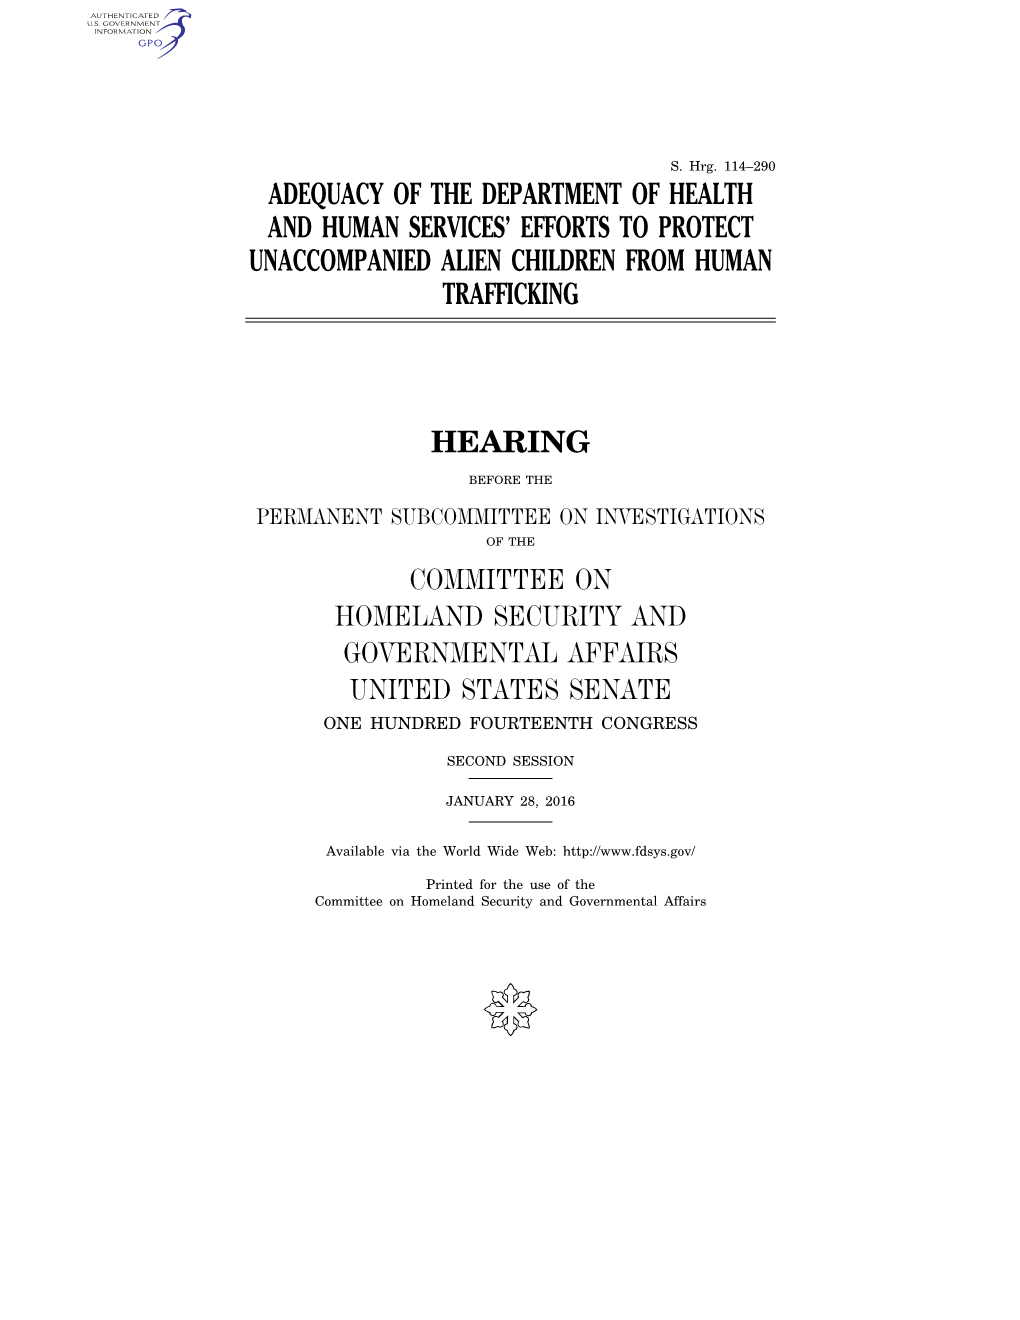 Adequacy of the Department of Health and Human Services’ Efforts to Protect Unaccompanied Alien Children from Human Trafficking